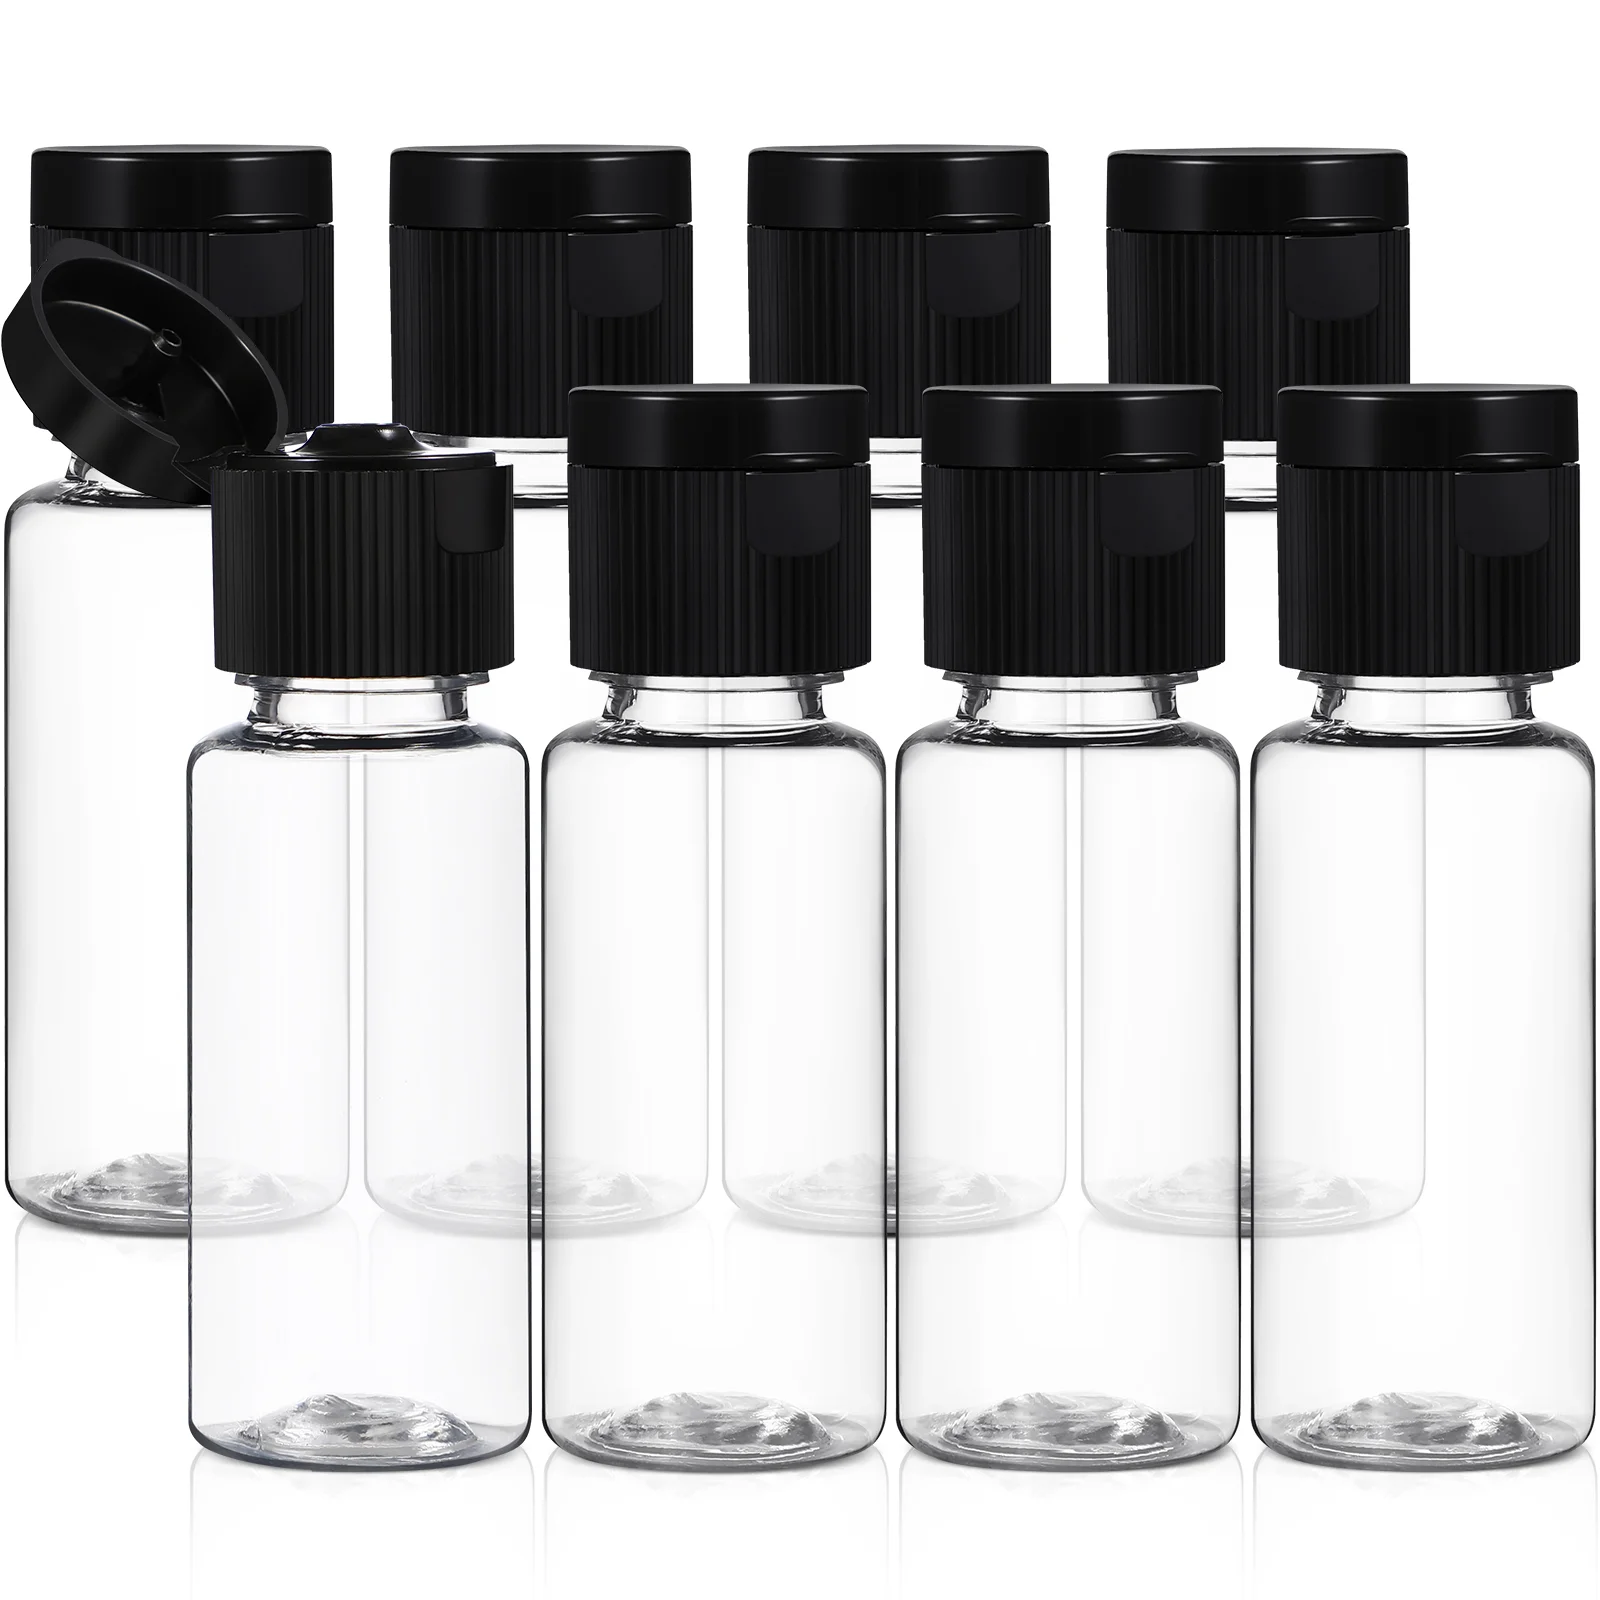 

30 Pcs Sample Bottles 20ml Packing Containers with Lids Empty Small Jars Cover Clear